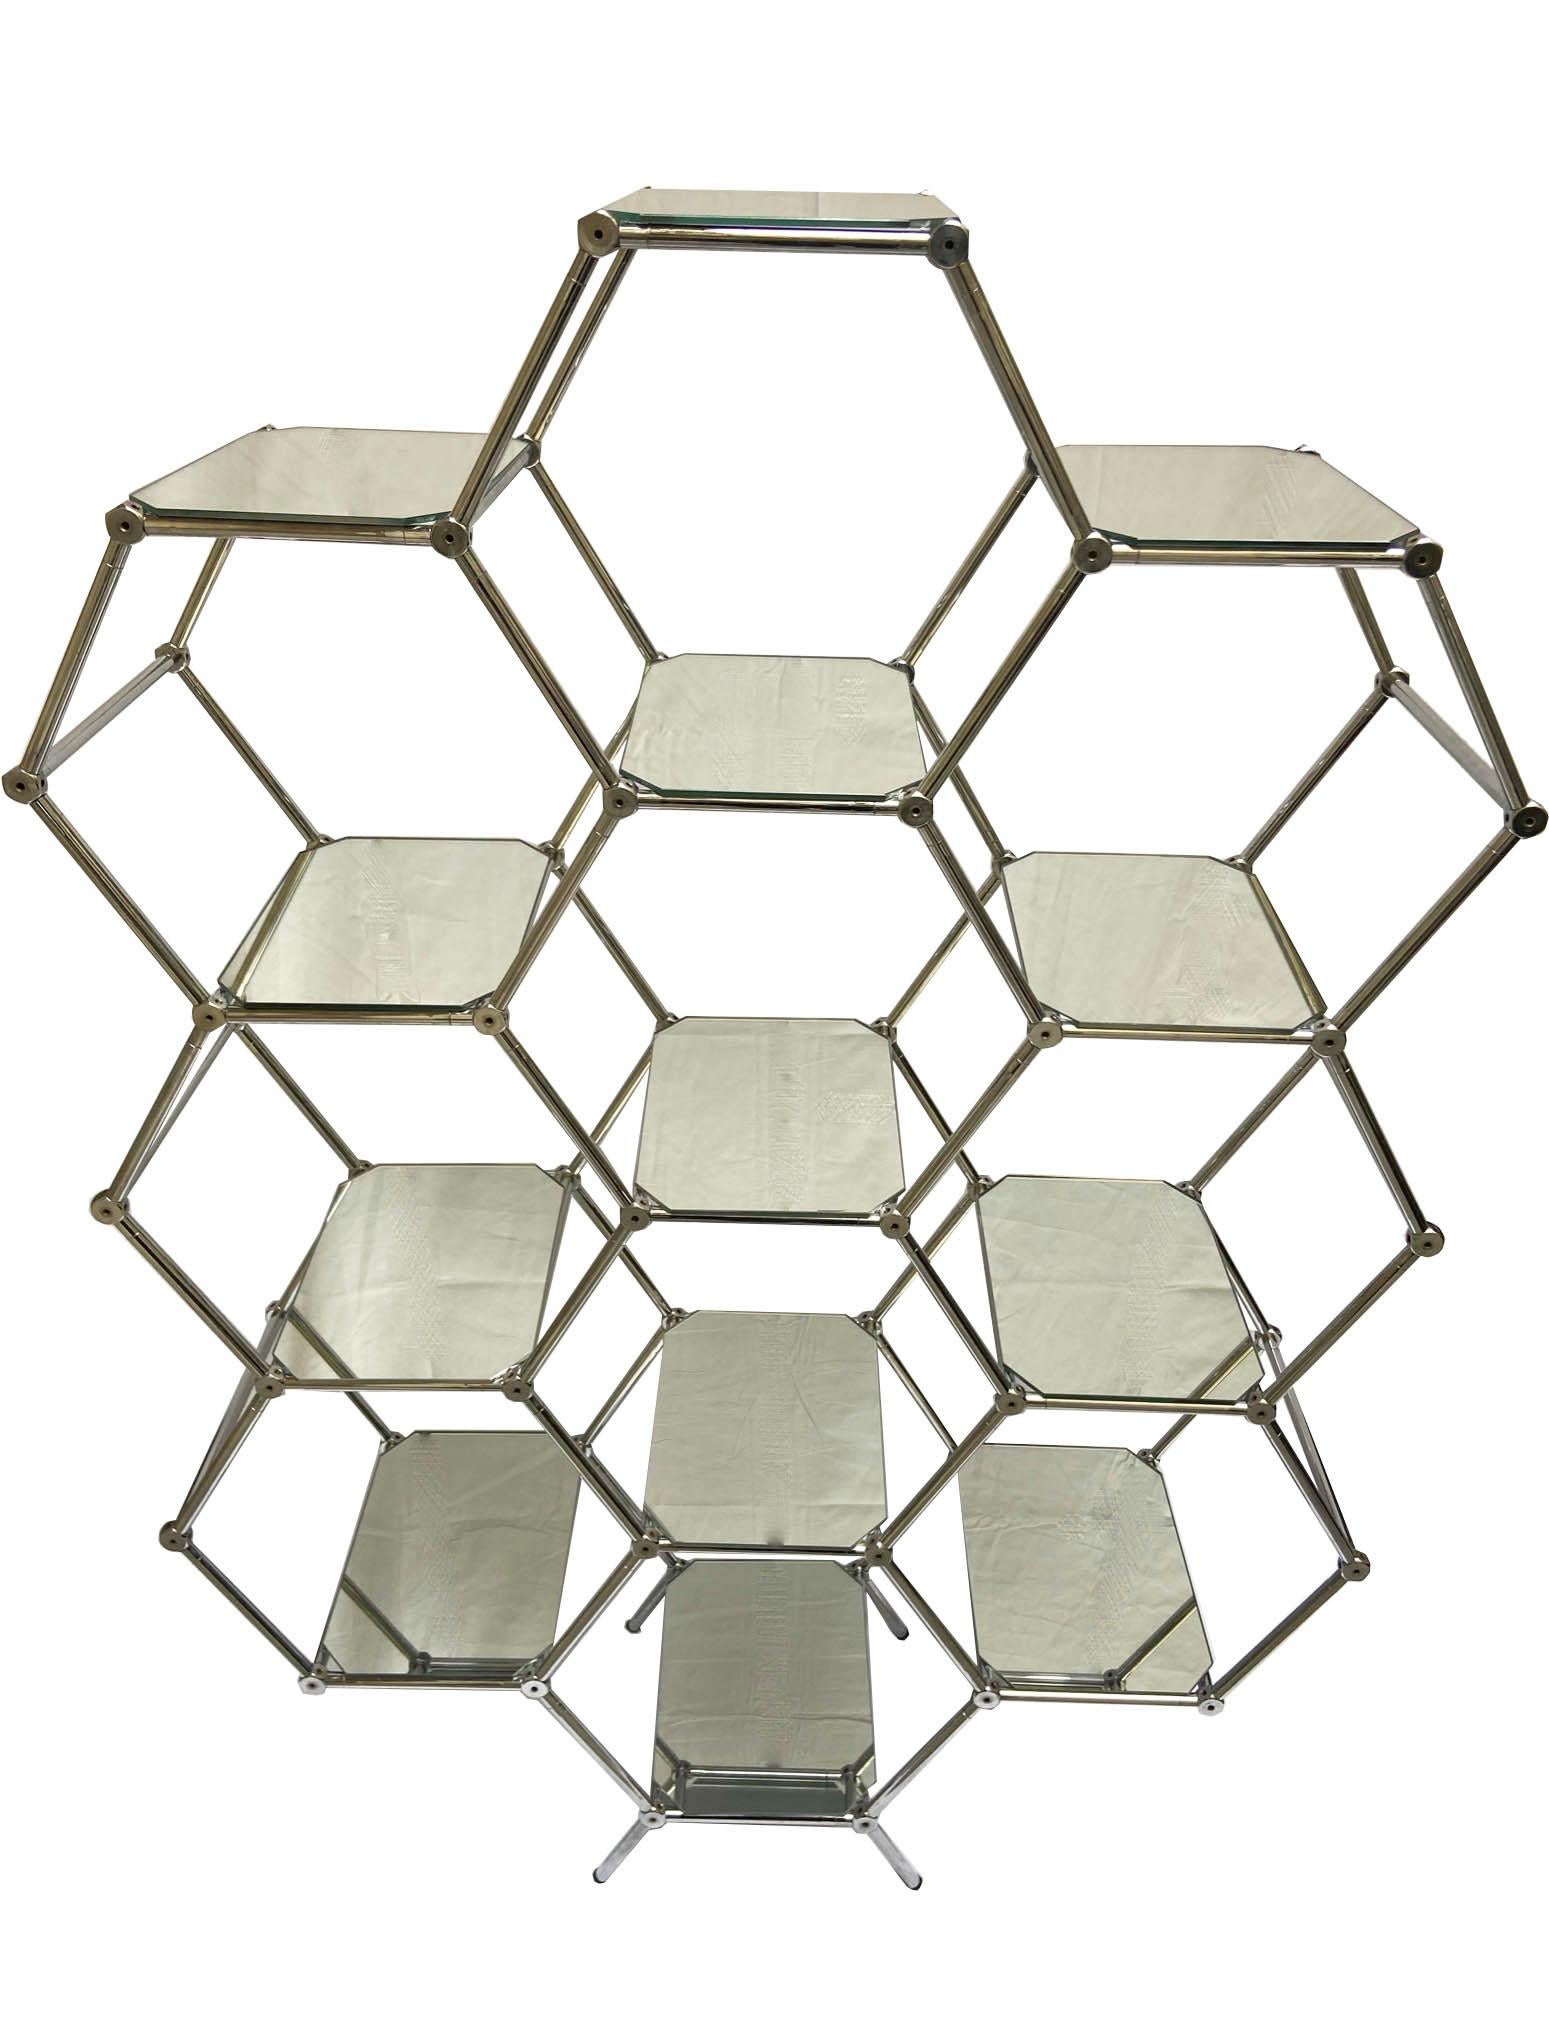 Étagère hexagonal honeycomb display. Modular chromed metal structure fixed with joints and mirrored glass plates that create 10 hexagonal spaces to display your most expensive collection.